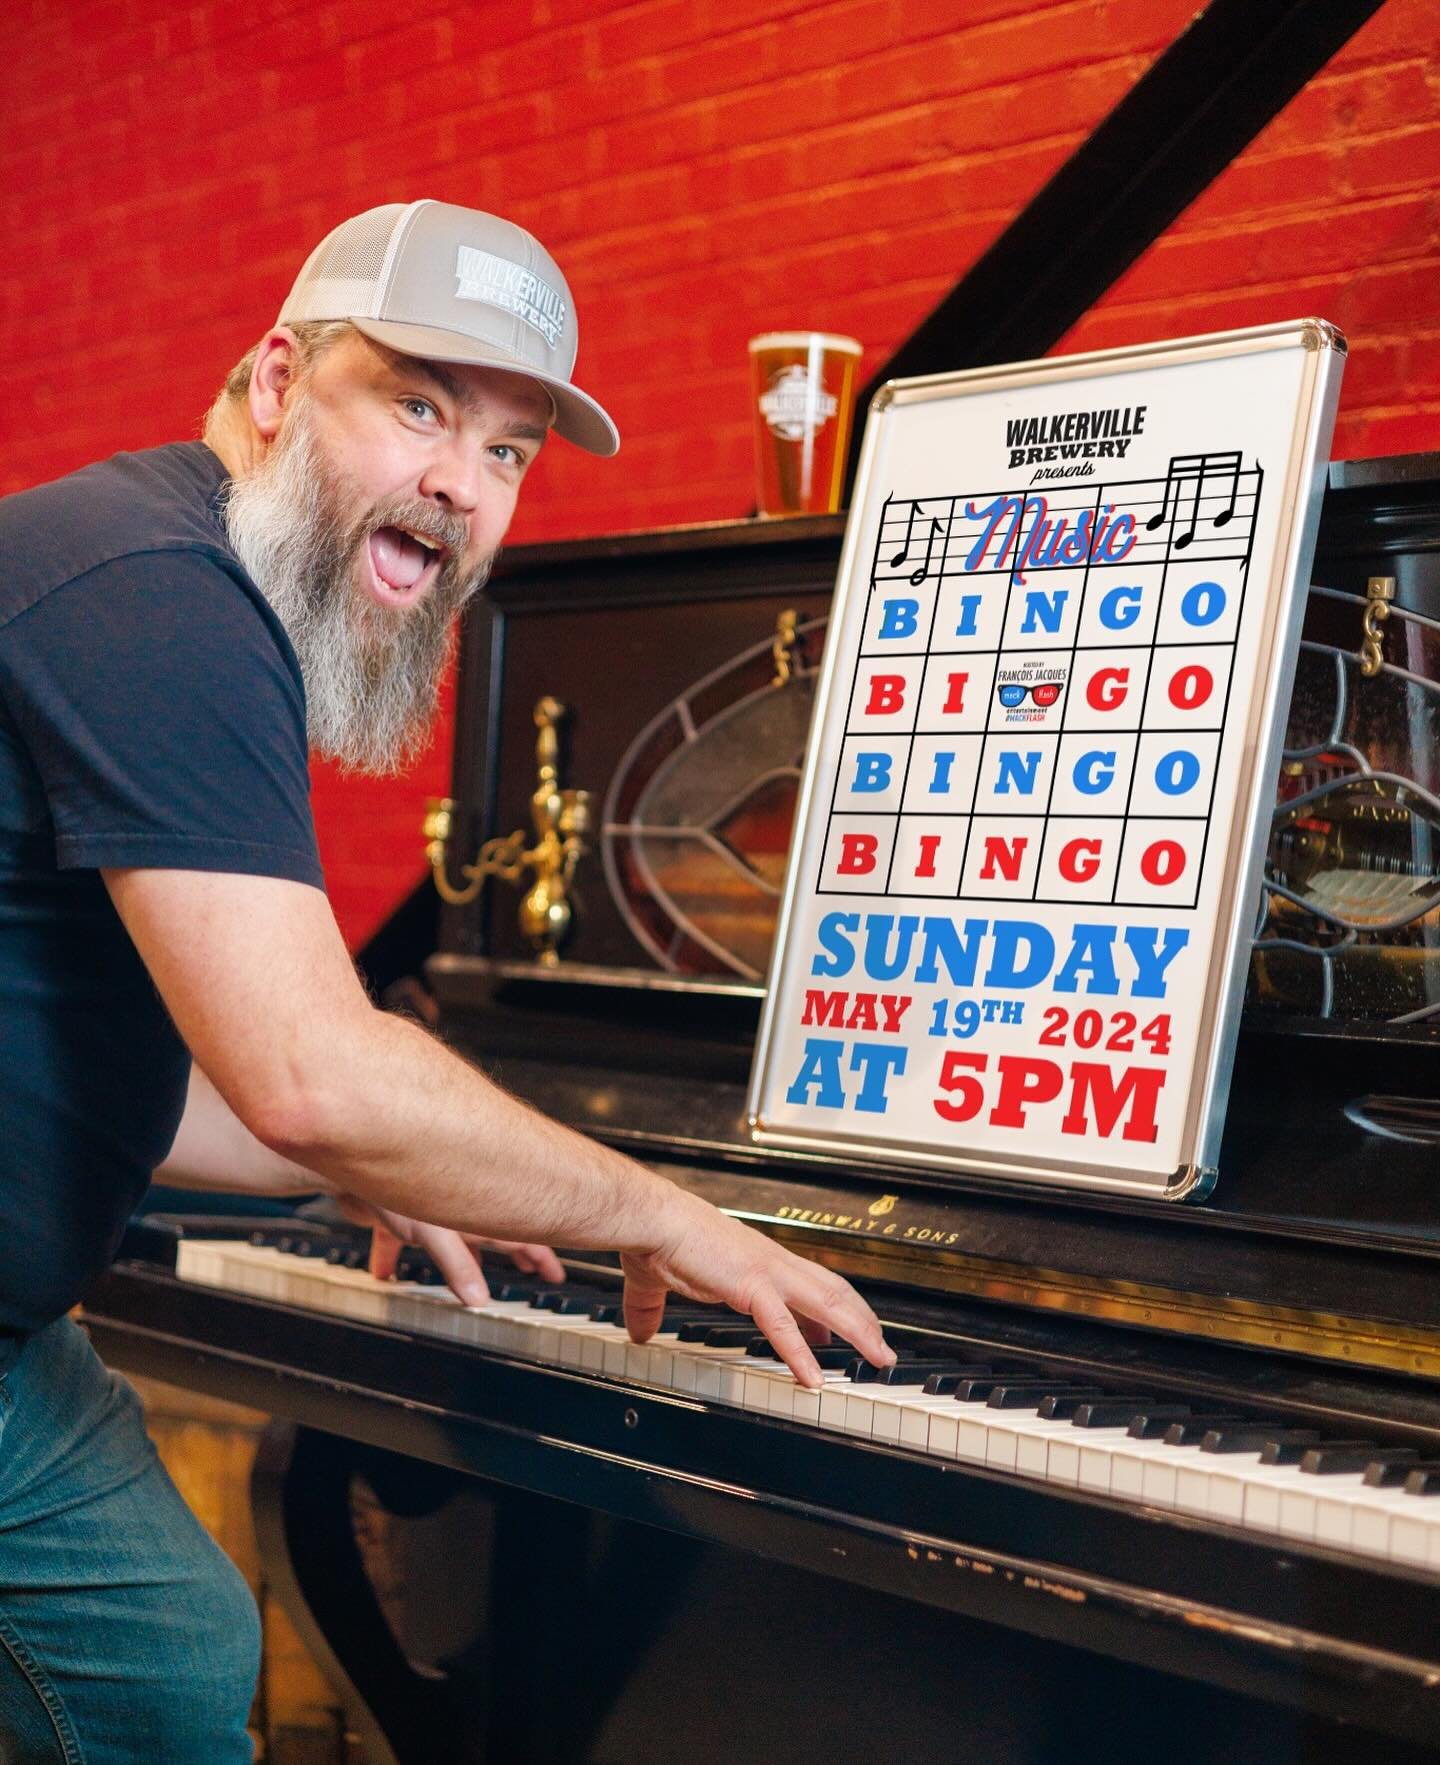 B-I-N-G-O! 🎶

Join us for Music Bingo Trivia THIS Sunday, May 19th at 5pm with your host @mackflash! A night filled with a little bit of bingo, a little bit of trivia and a whole lot of music! 

Music Bingo Trivia is always free to play and great pr